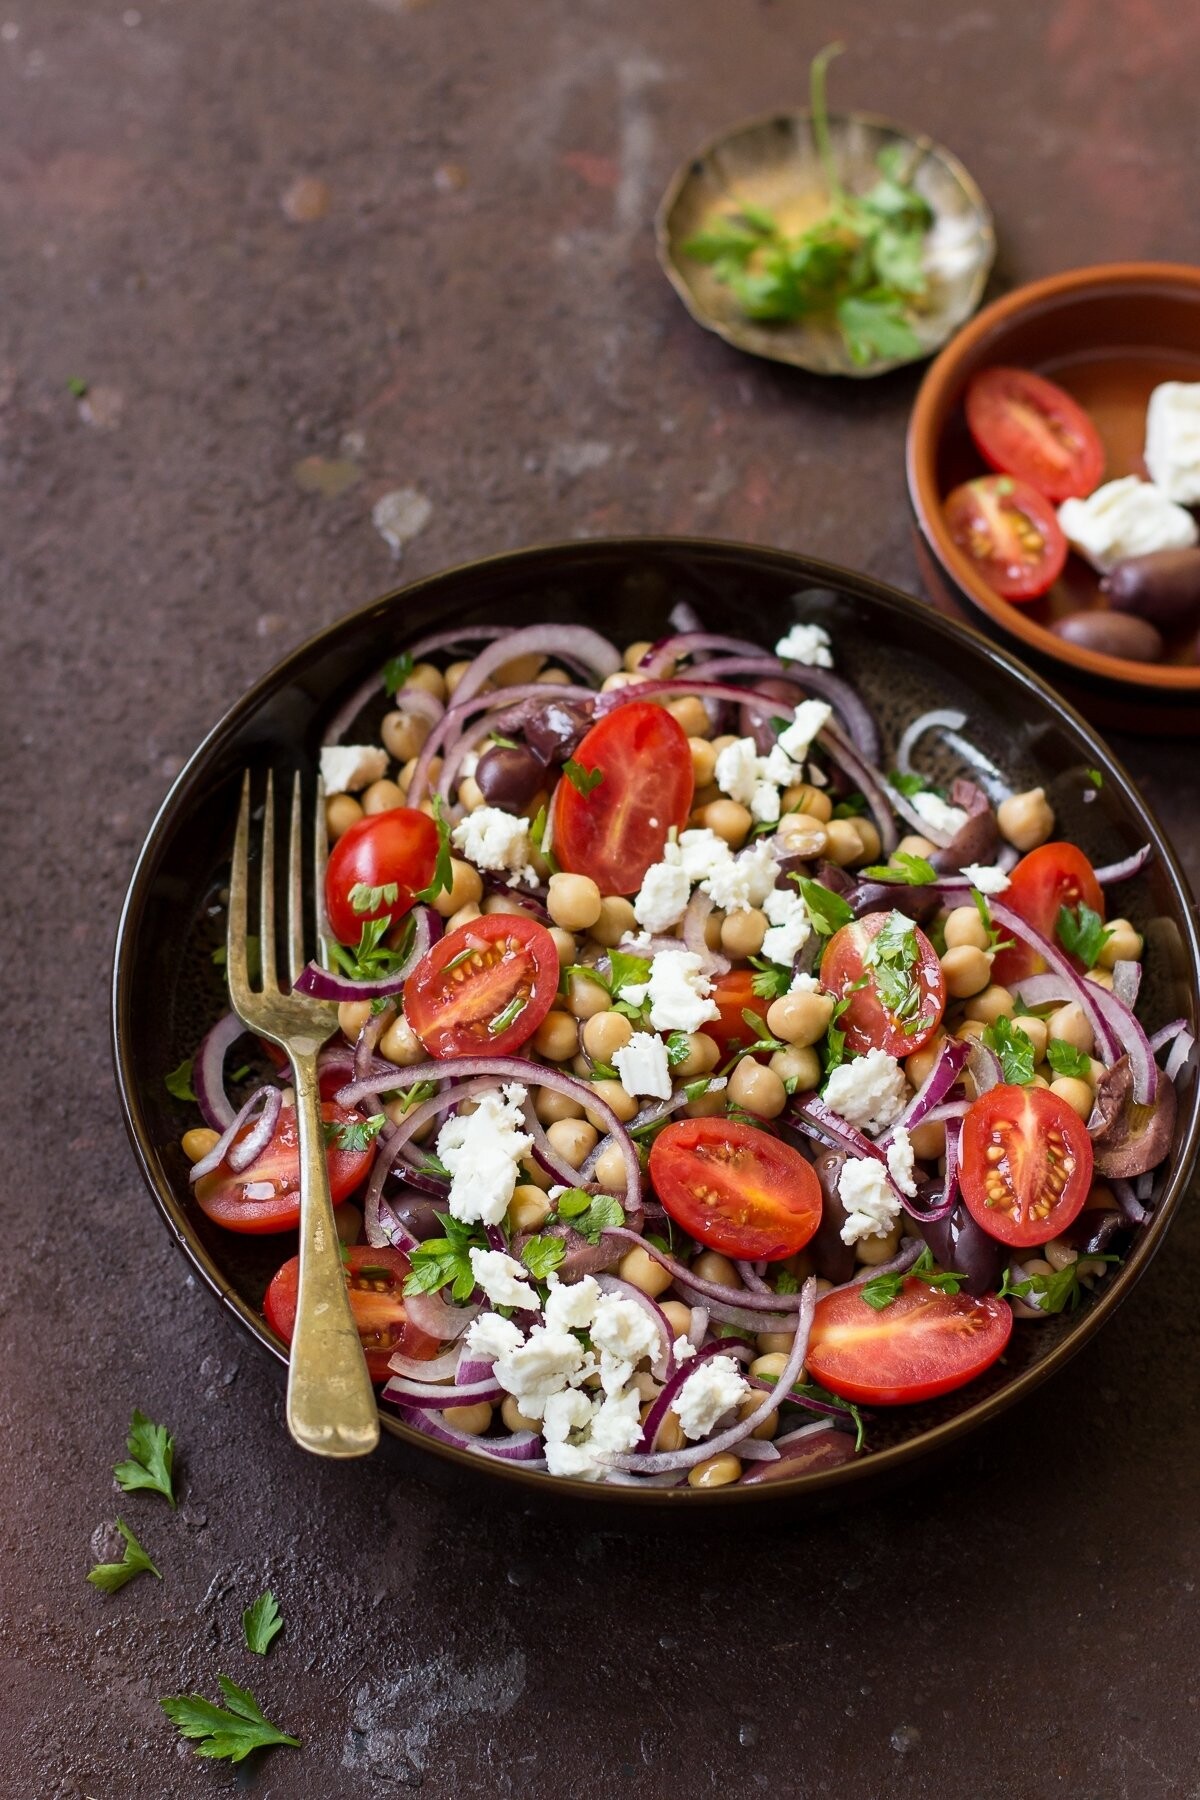 A Turkish salad made with chickpeas, red onion, olives, cherry tomatoes, feta and parsley.